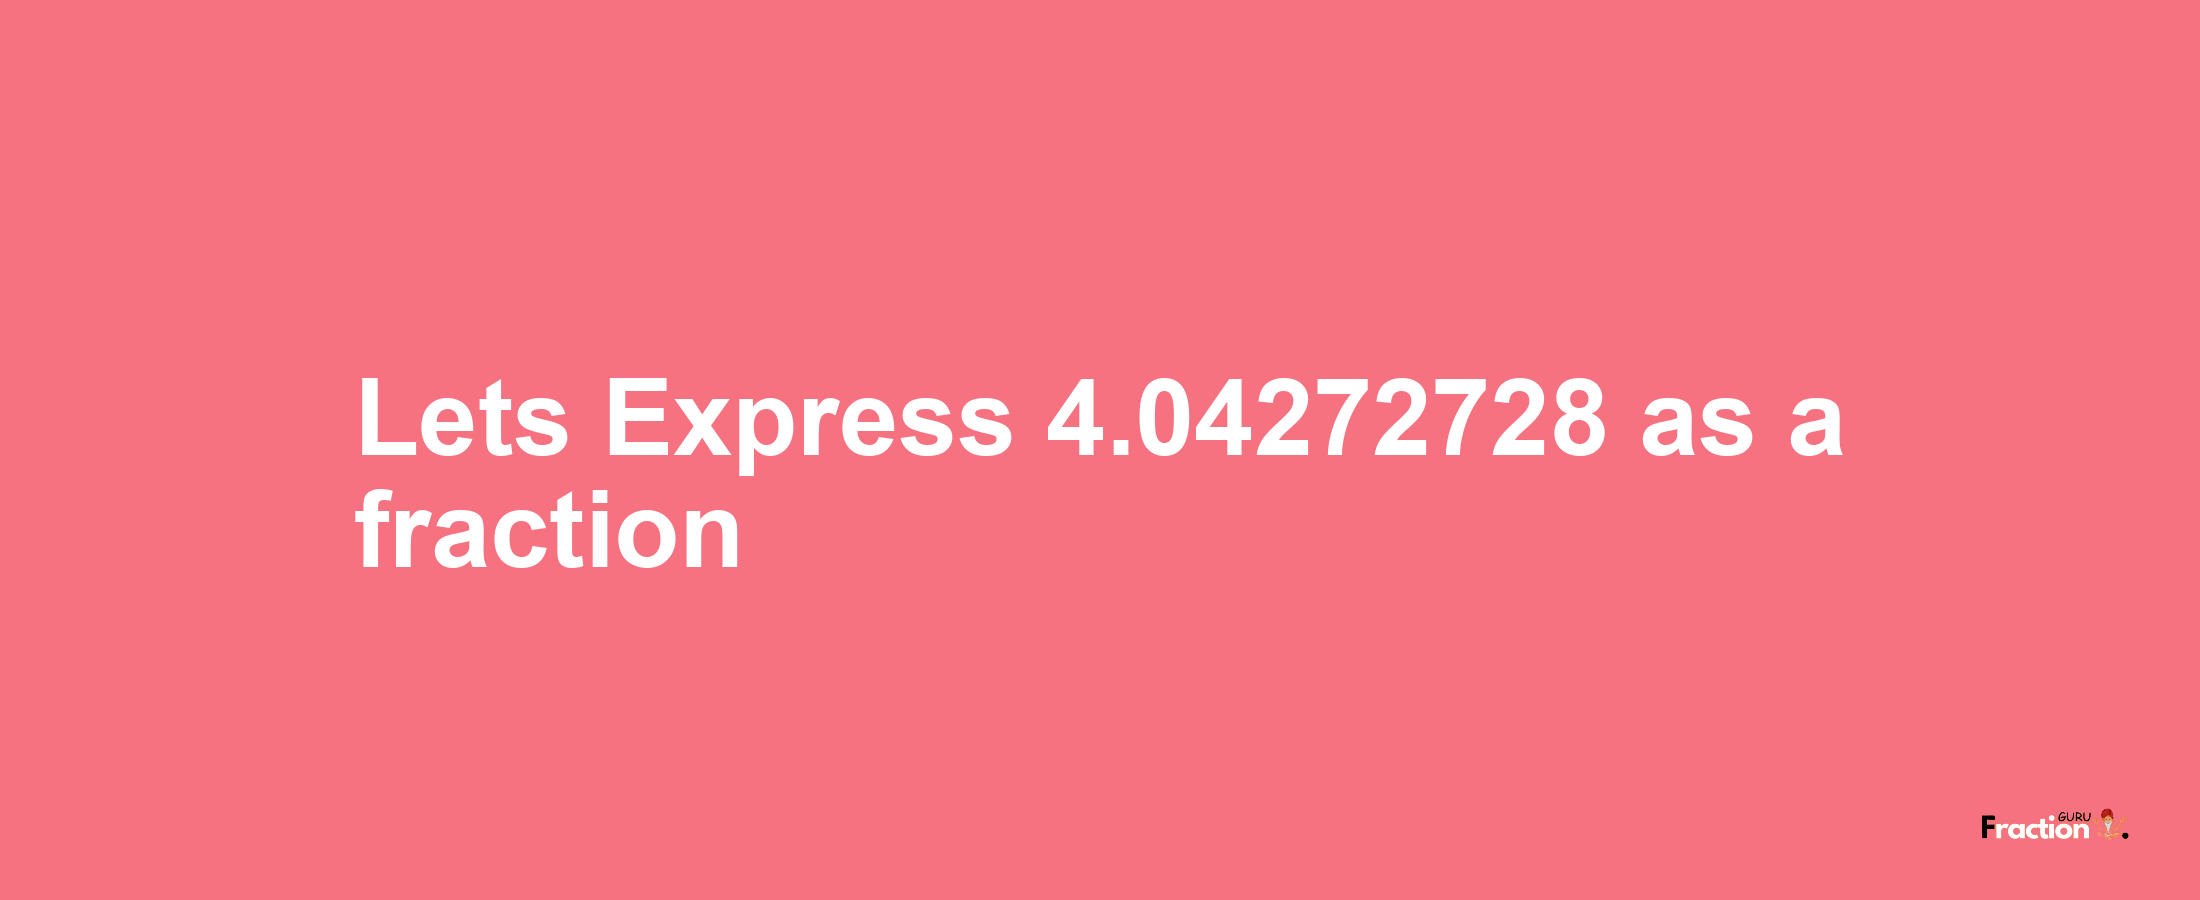 Lets Express 4.04272728 as afraction